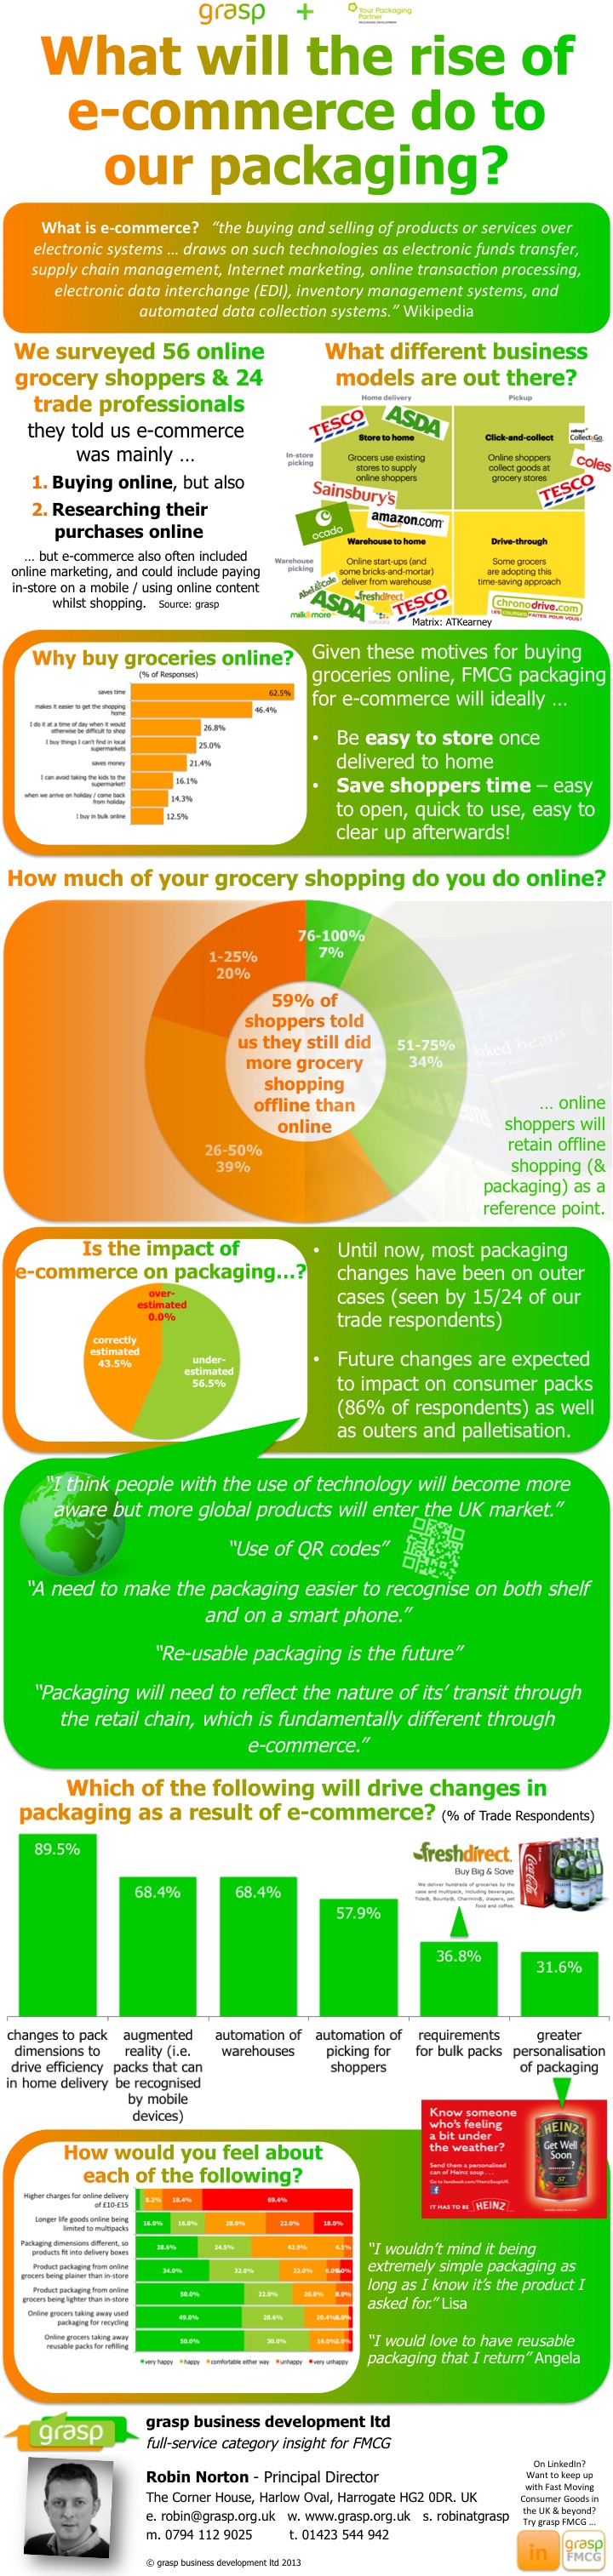 What will the rise of e-commerce do to our packaging? Infographic